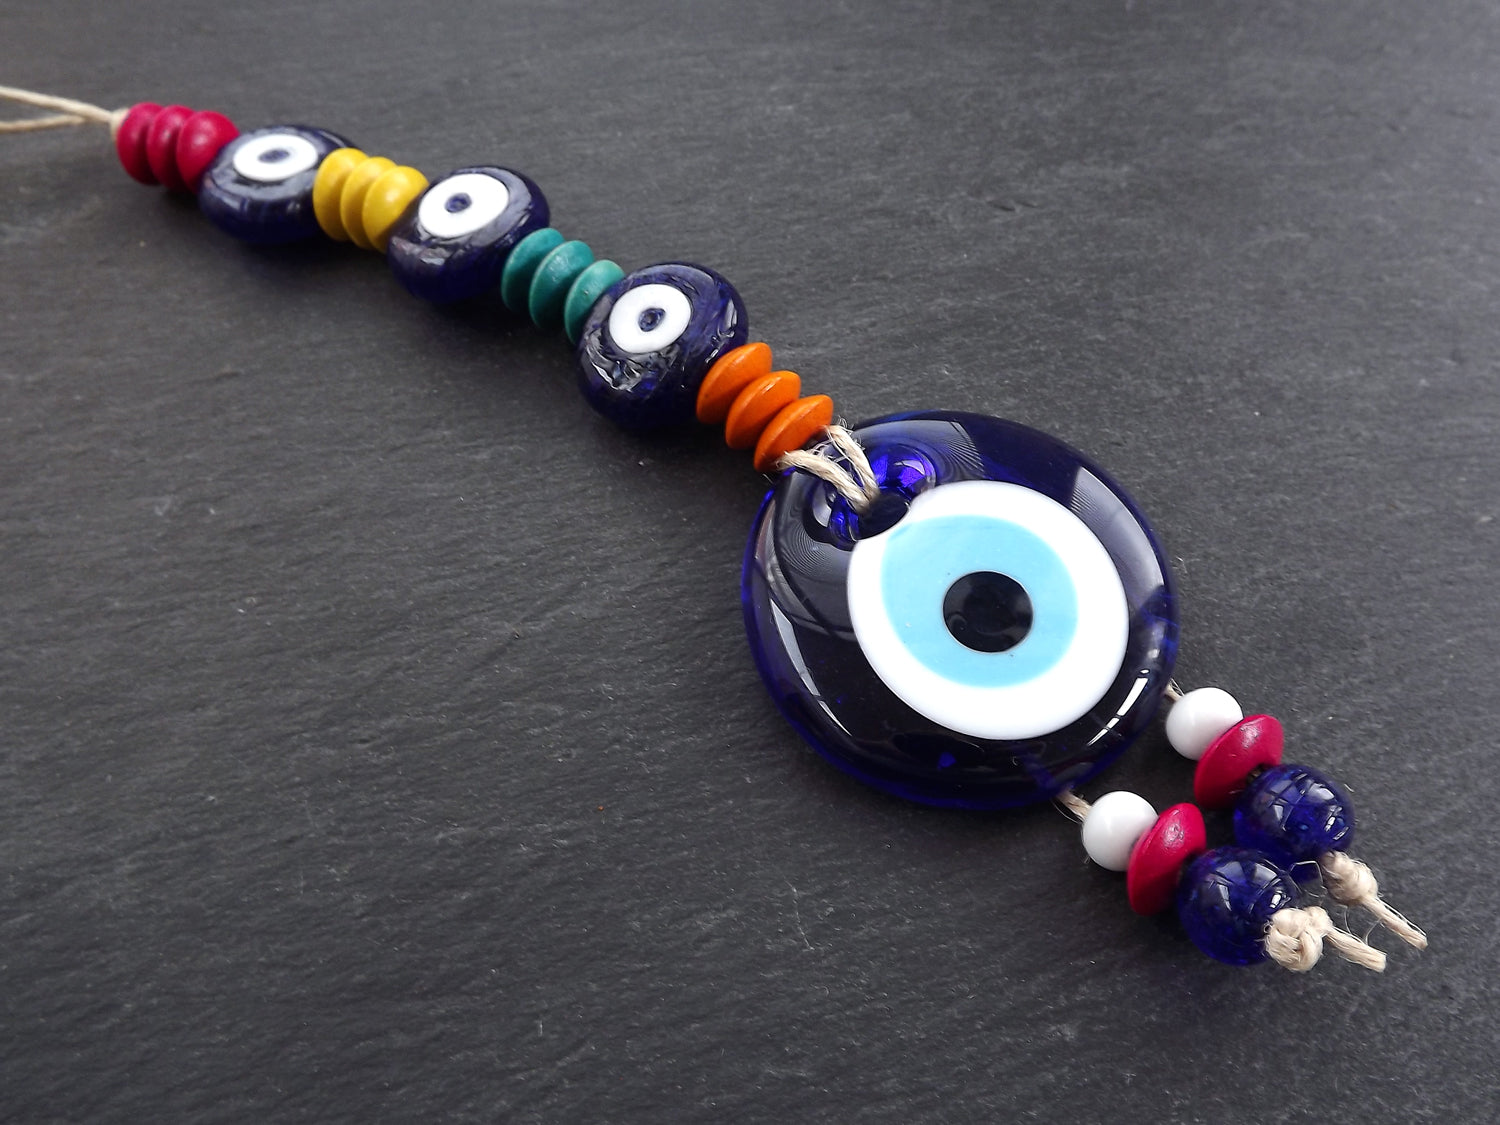 Fun Colorful Turkish Evil Eye Wall Hanging Home Garden Decoration with Evileye Traditional Artisan Beads - No:53